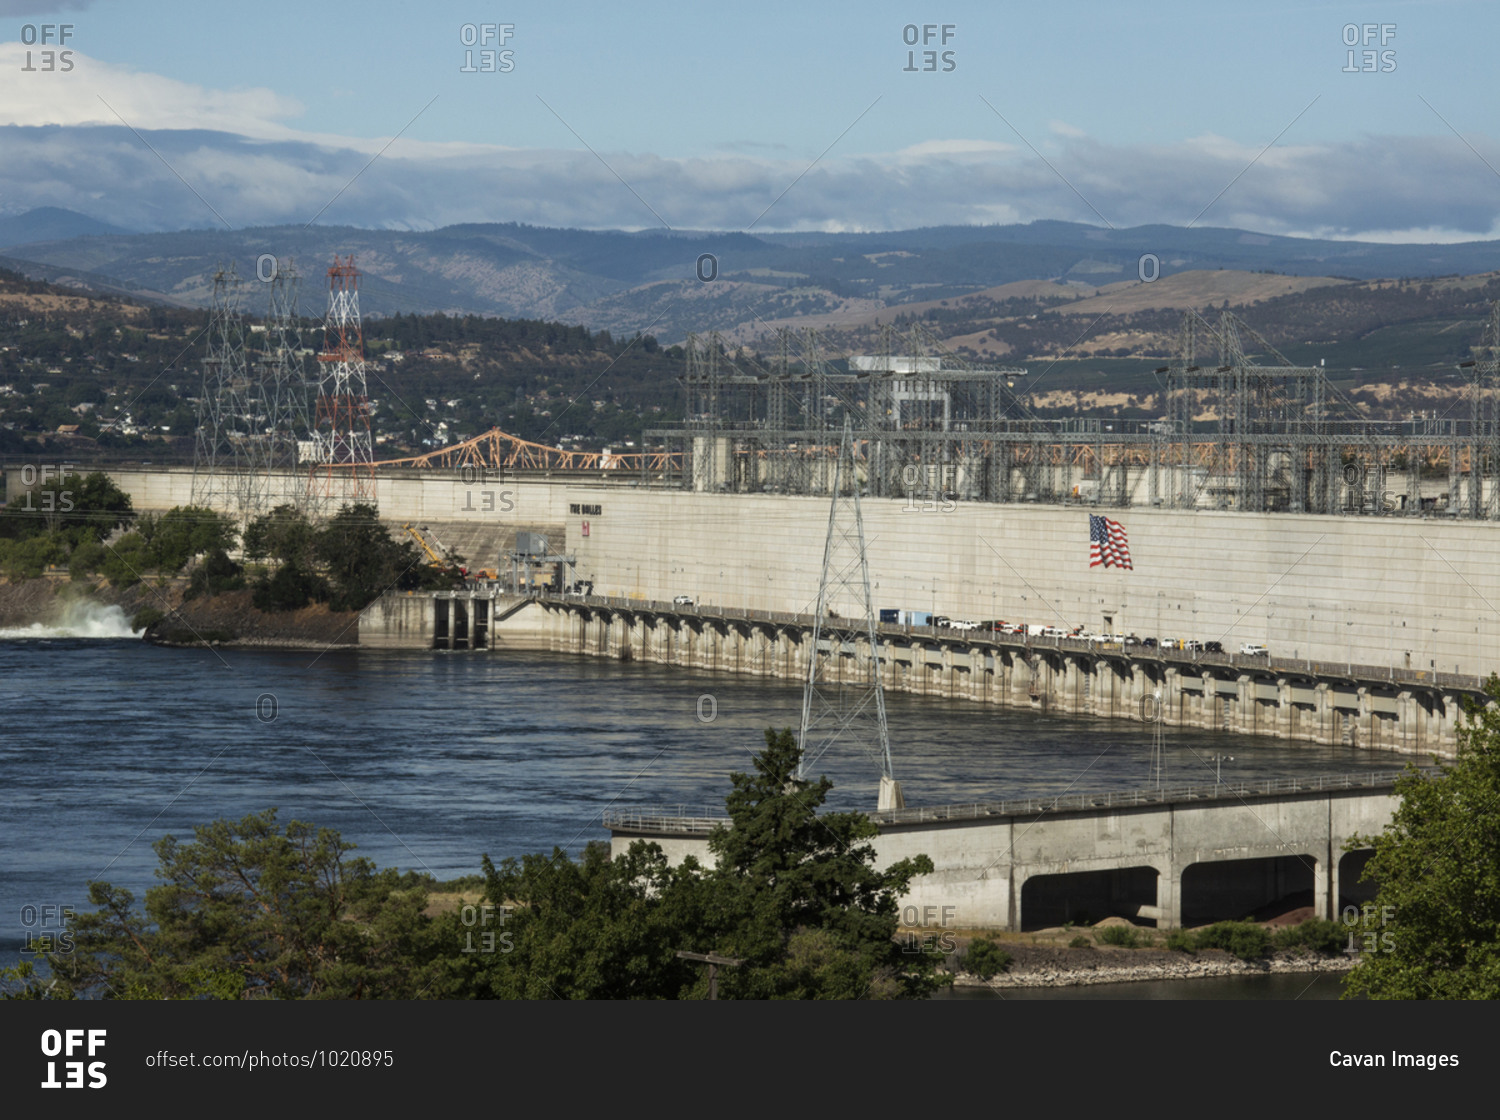 The dalles dam on the columbia river on a sunny day.